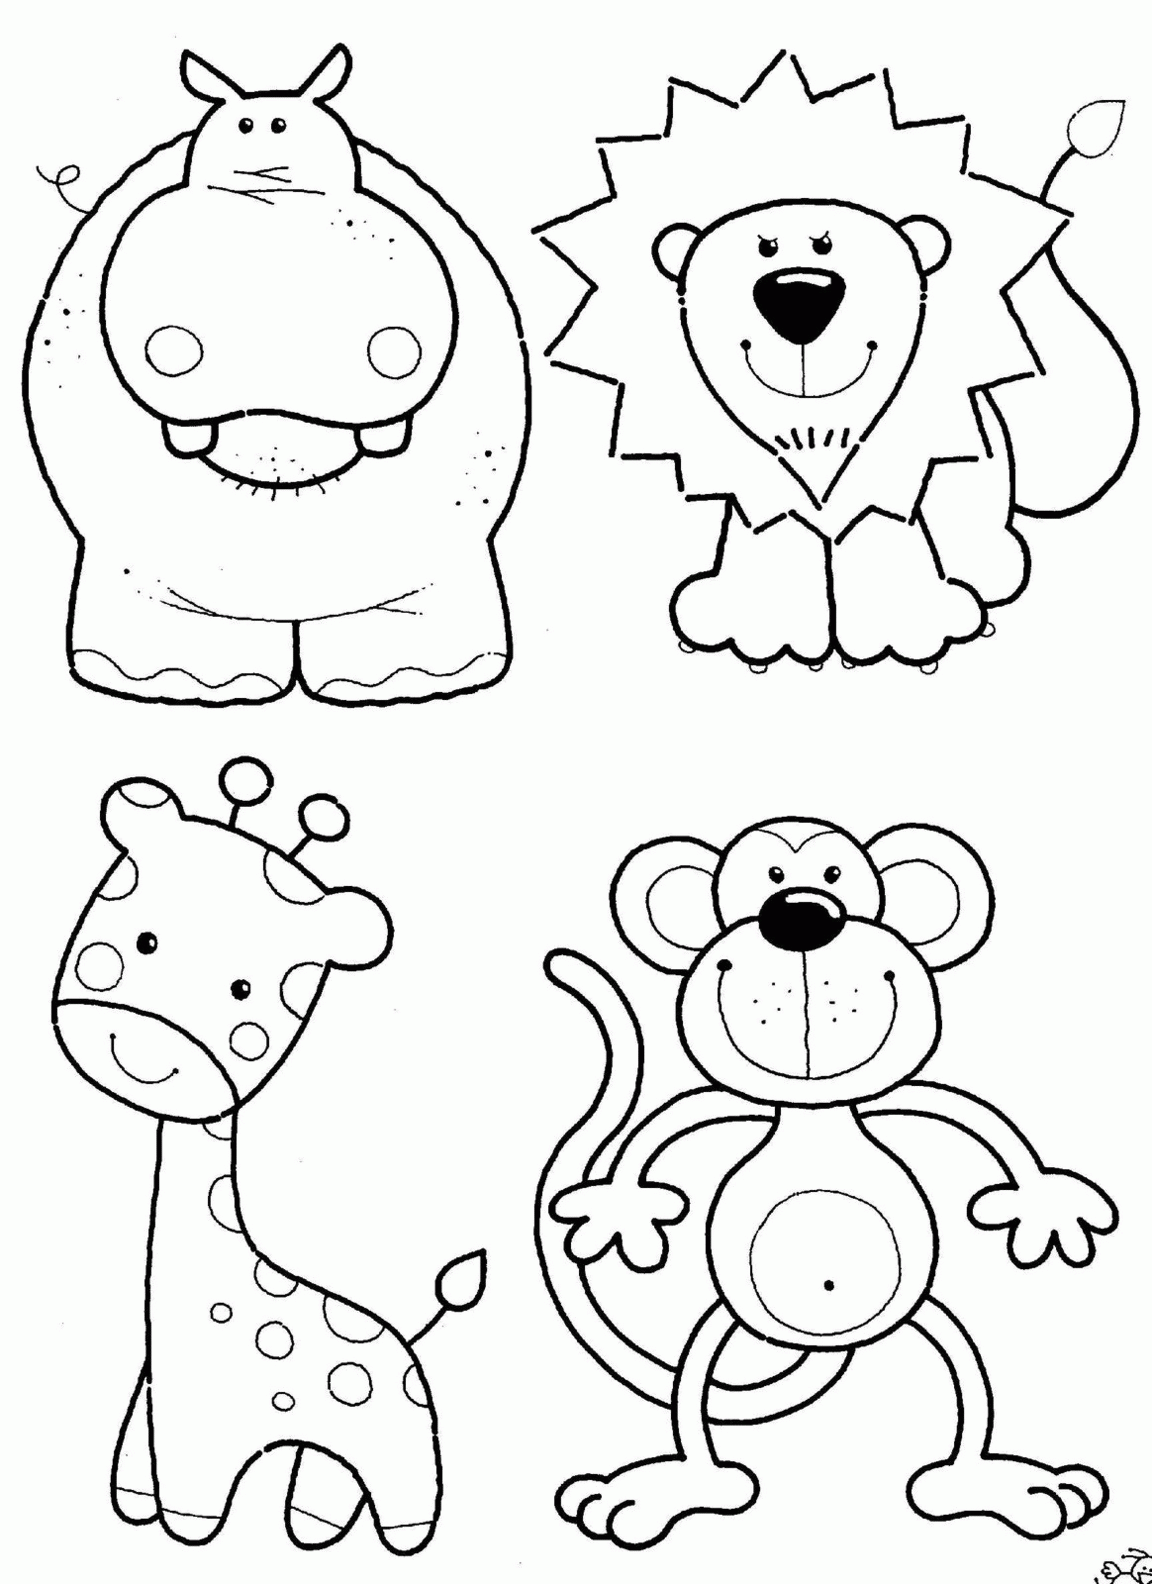 Safari Animal Coloring Page Images   Coloring Home